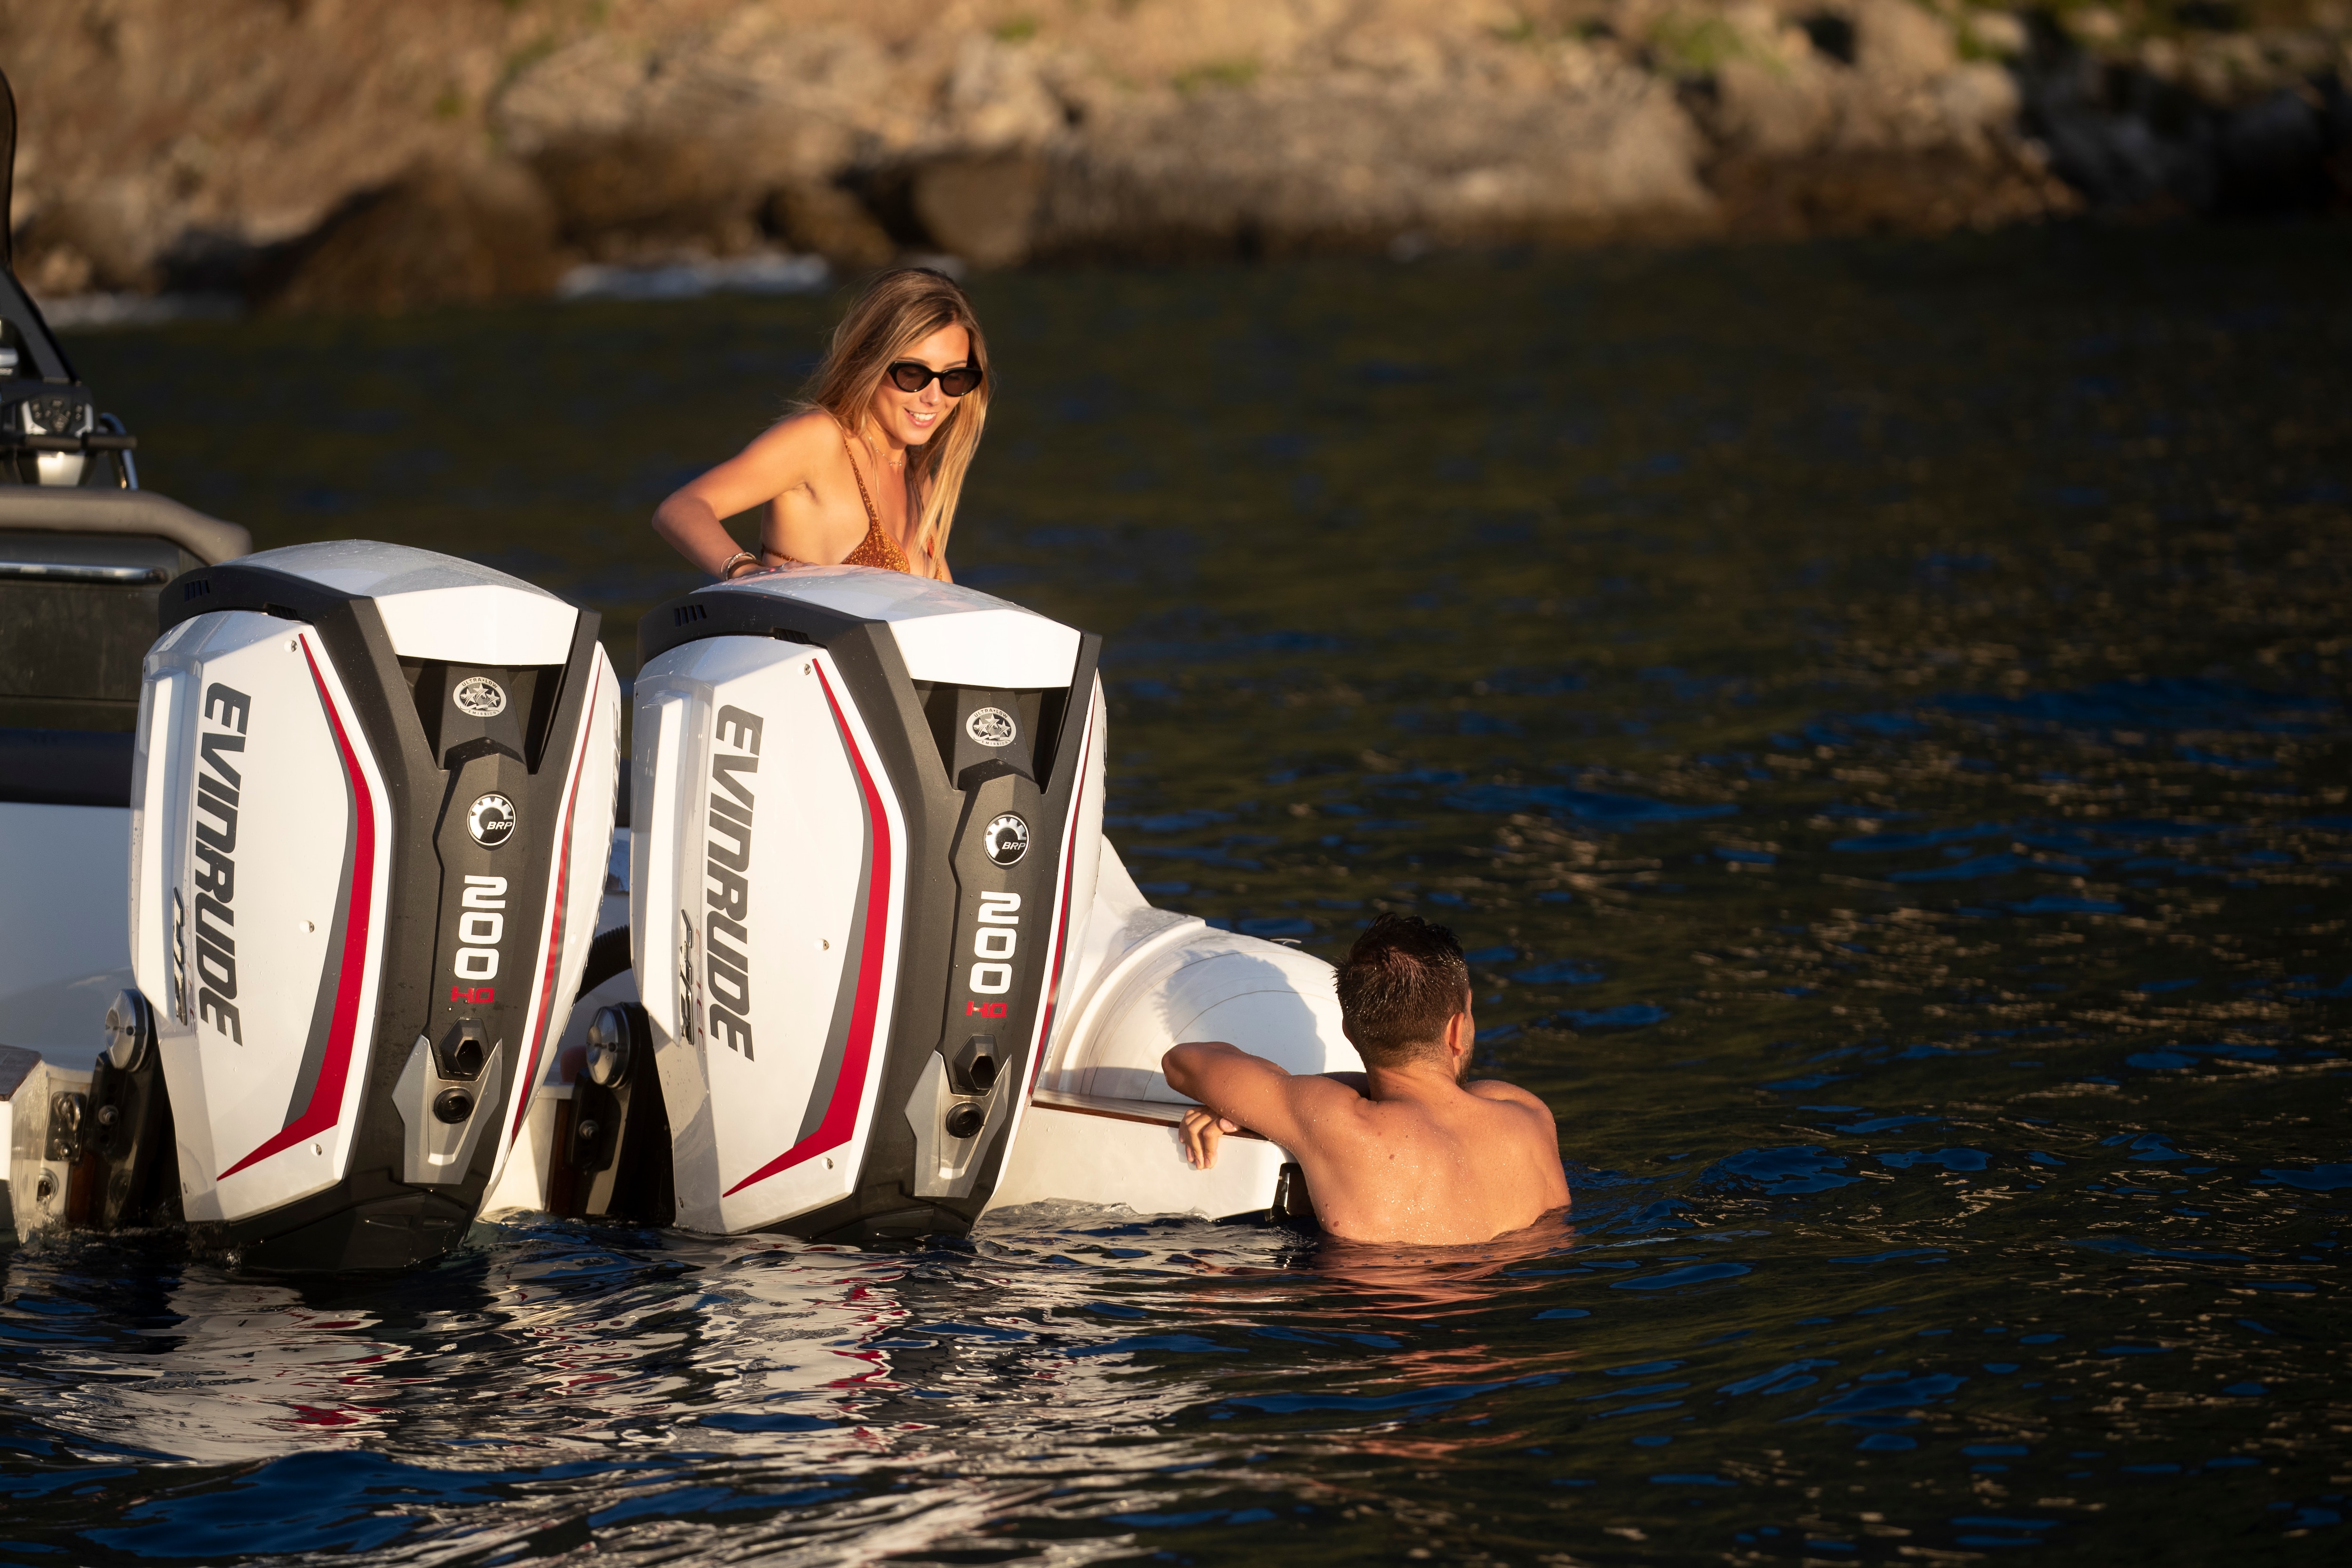 A man and a woman swimming close to a boat yielding an Evinrude motor